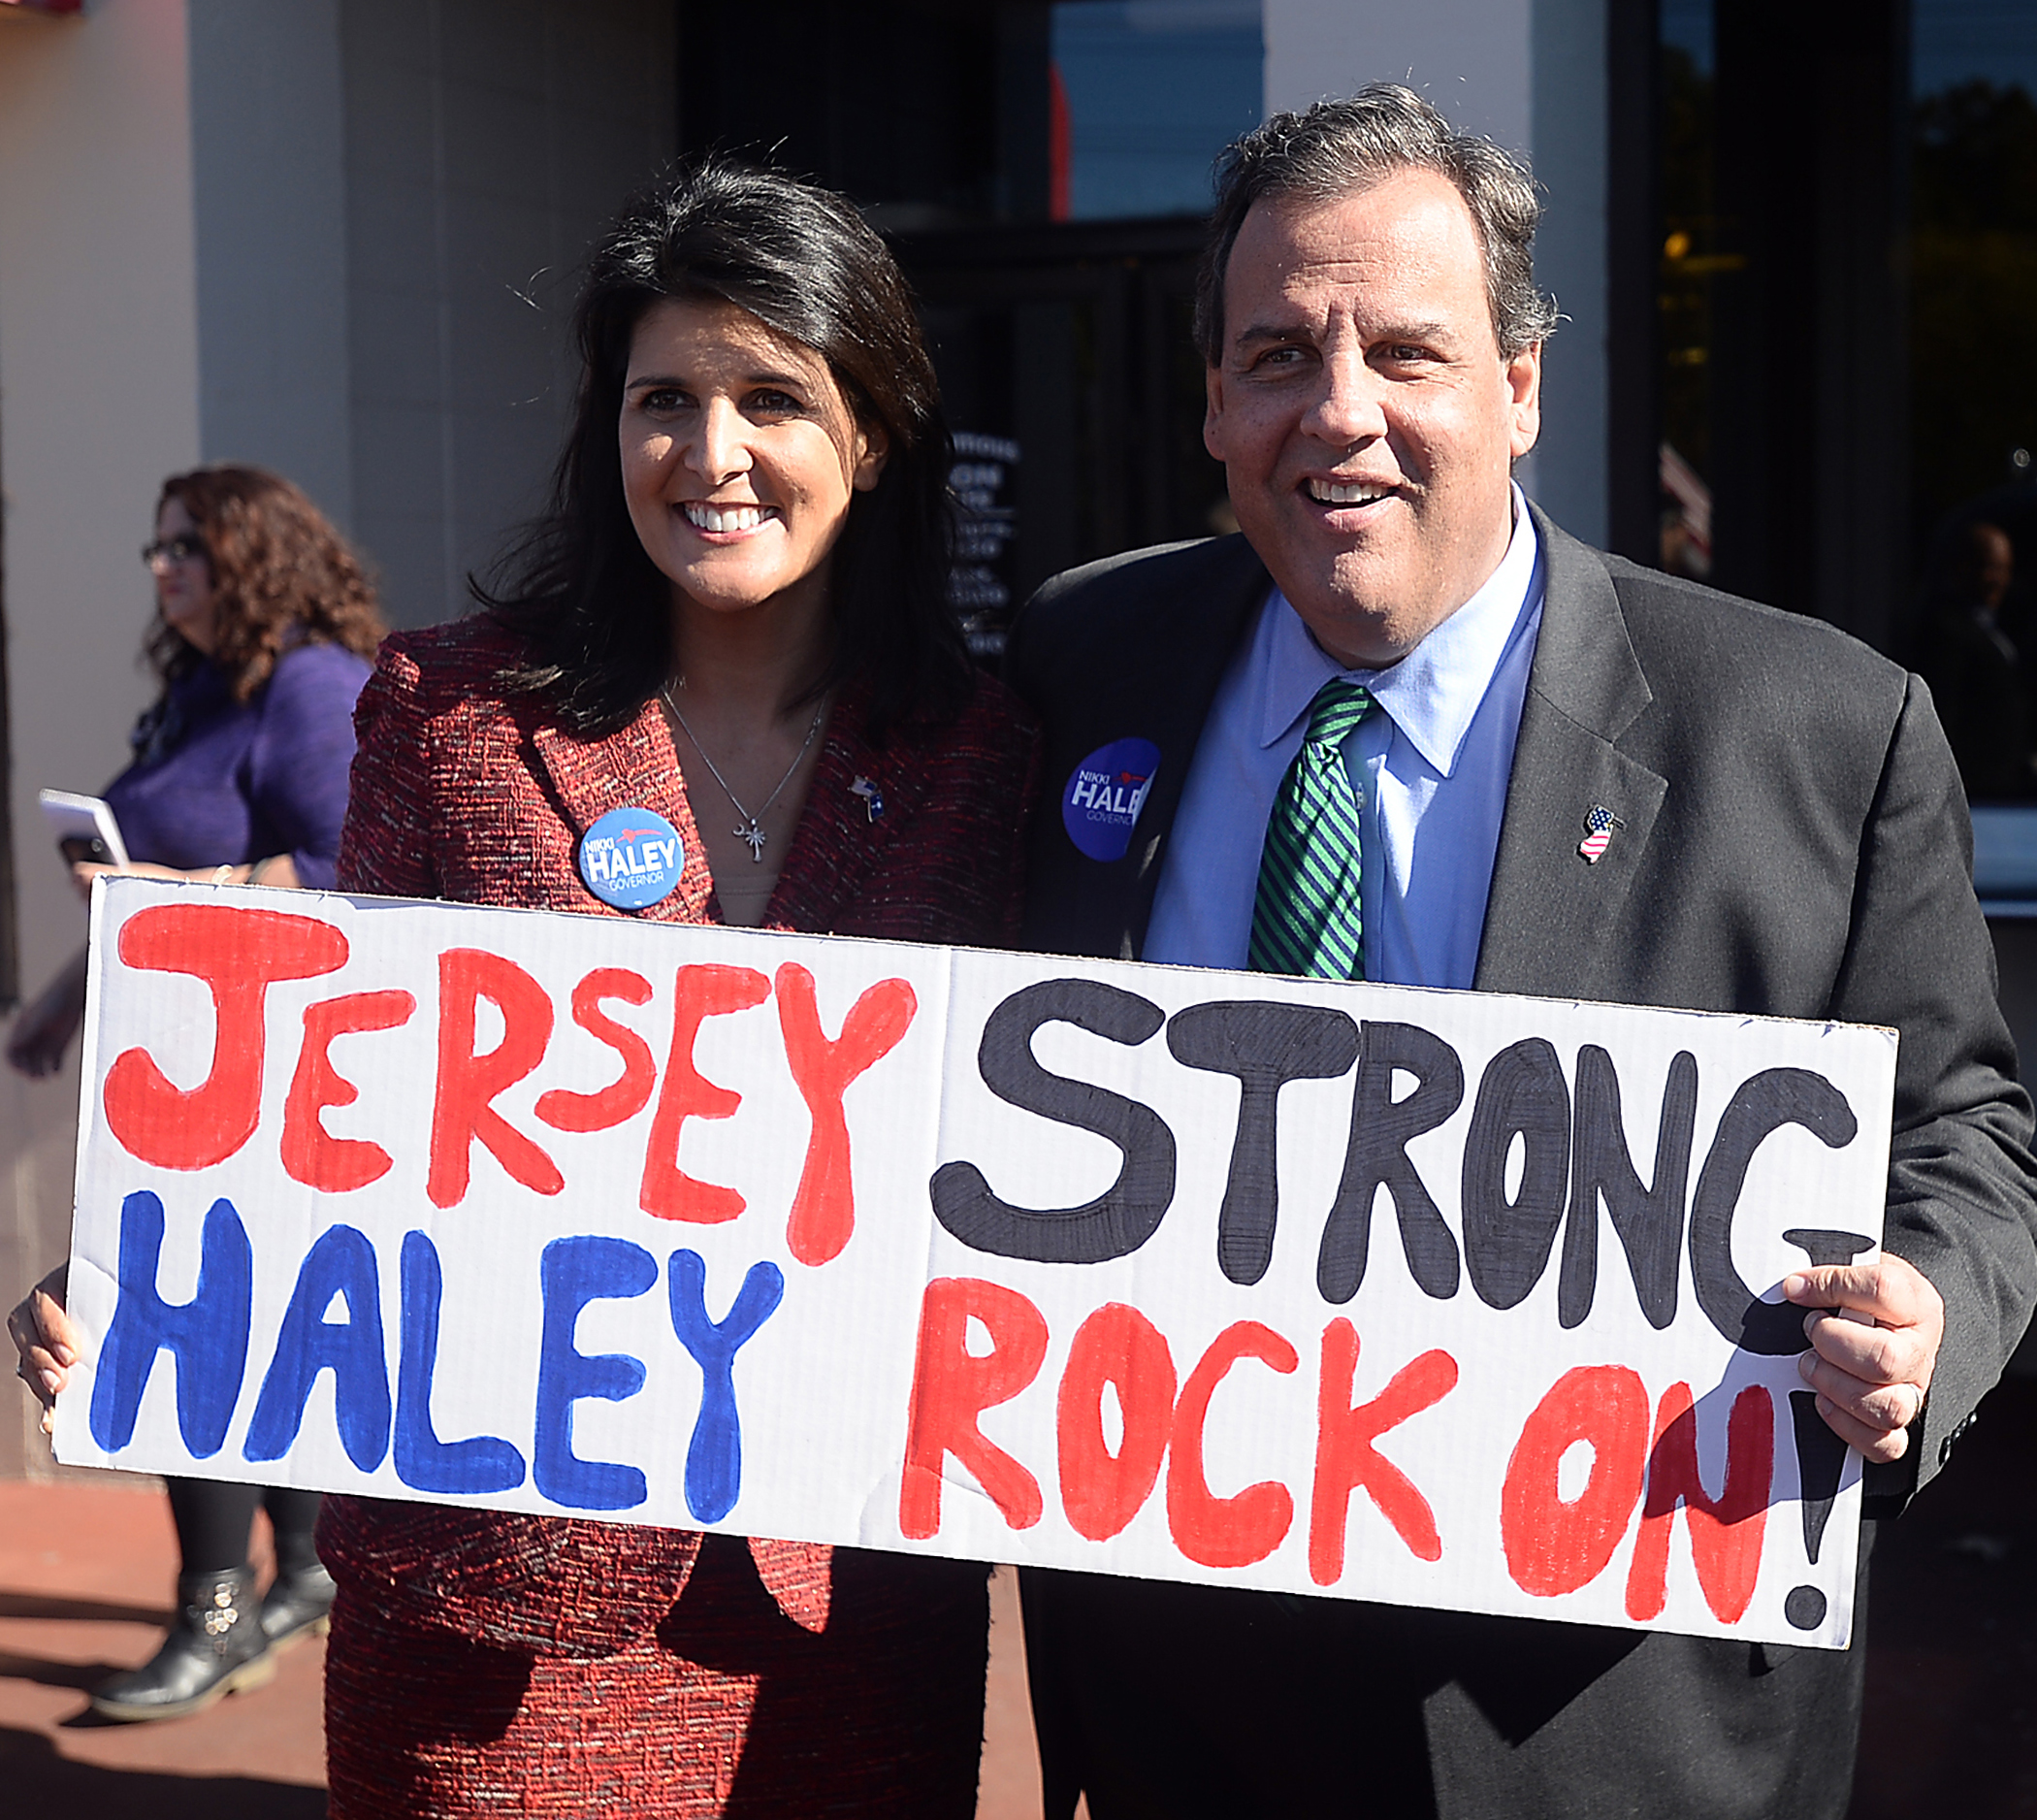 PHOTO: Gov. Nikki Haley of South Carolina and Gov. Chris Christie of New Jersey show support for each other at a drive-in restaurant in Spartanburg, S.C., on Nov. 2, 2014.